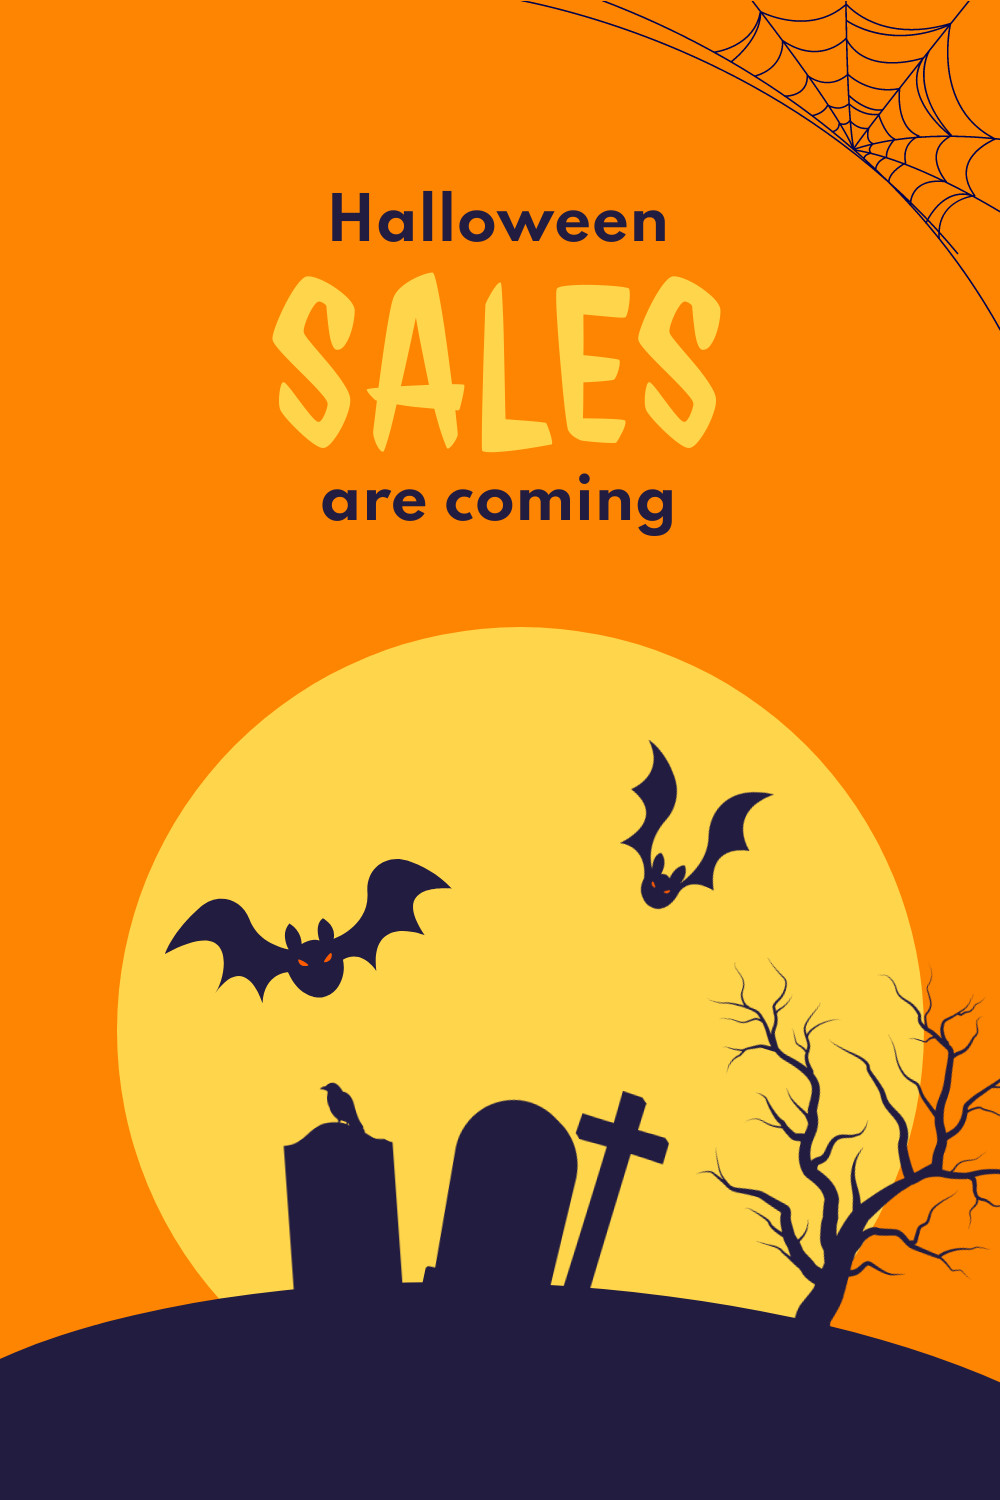 Halloween Sales are Coming